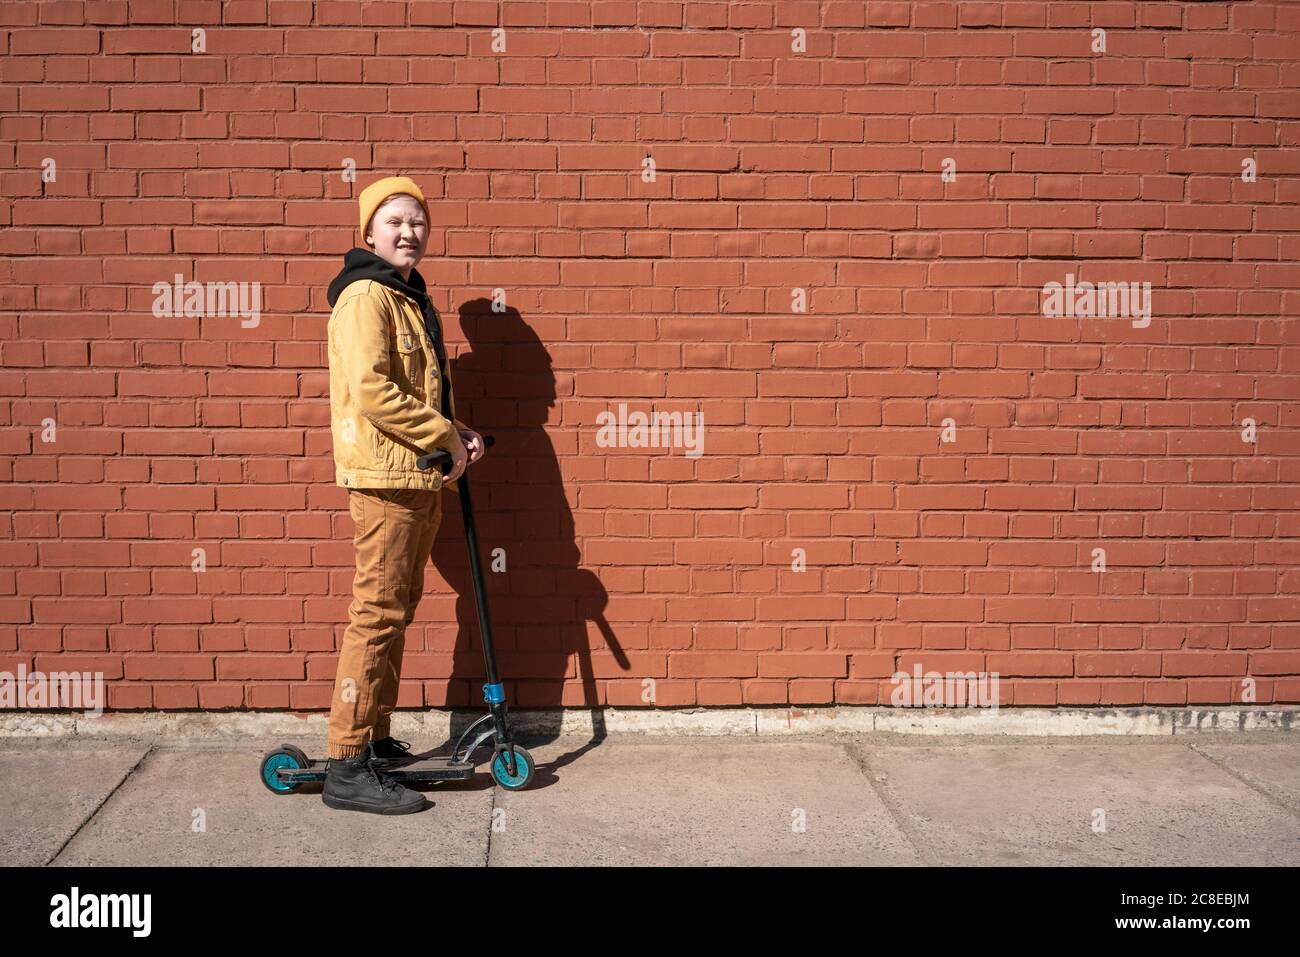 Boy winking while standing with push scooter on sidewalk against brick wall Stock Photo